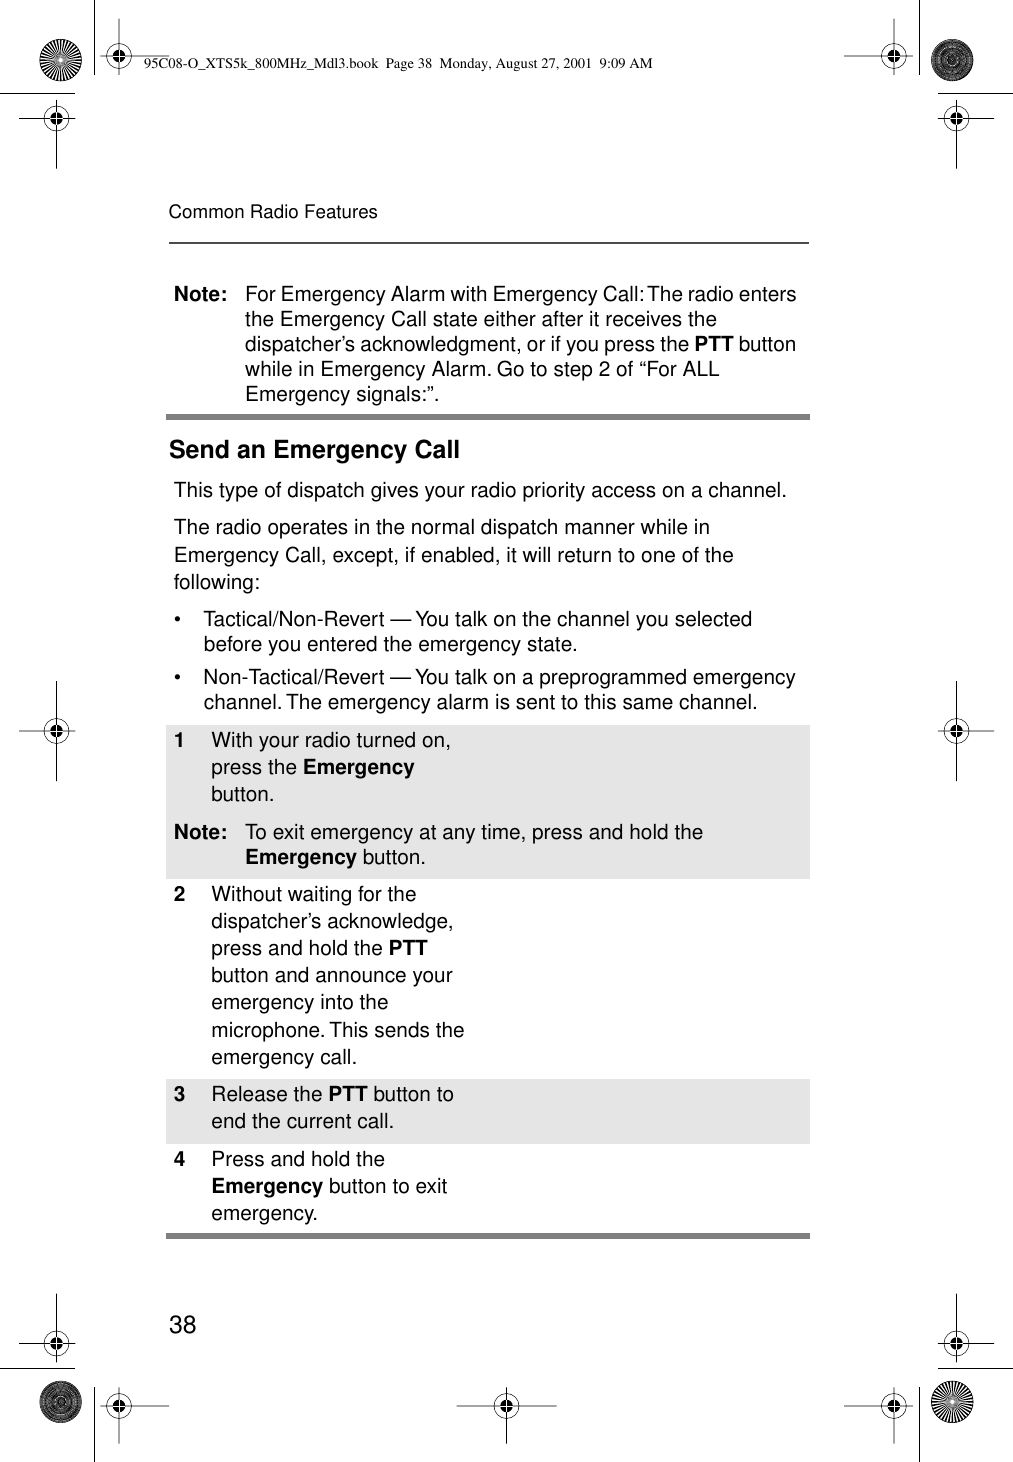 38Common Radio FeaturesSend an Emergency CallNote: For Emergency Alarm with Emergency Call: The radio enters the Emergency Call state either after it receives the dispatcher’s acknowledgment, or if you press the PTT button while in Emergency Alarm. Go to step 2 of “For ALL Emergency signals:”.This type of dispatch gives your radio priority access on a channel.The radio operates in the normal dispatch manner while in Emergency Call, except, if enabled, it will return to one of the following:• Tactical/Non-Revert — You talk on the channel you selected before you entered the emergency state.• Non-Tactical/Revert — You talk on a preprogrammed emergency channel. The emergency alarm is sent to this same channel.1With your radio turned on, press the Emergency button.Note: To exit emergency at any time, press and hold the Emergency button.2Without waiting for the dispatcher’s acknowledge, press and hold the PTT button and announce your emergency into the microphone. This sends the emergency call.3Release the PTT button to end the current call. 4Press and hold the Emergency button to exit emergency. 95C08-O_XTS5k_800MHz_Mdl3.book  Page 38  Monday, August 27, 2001  9:09 AM